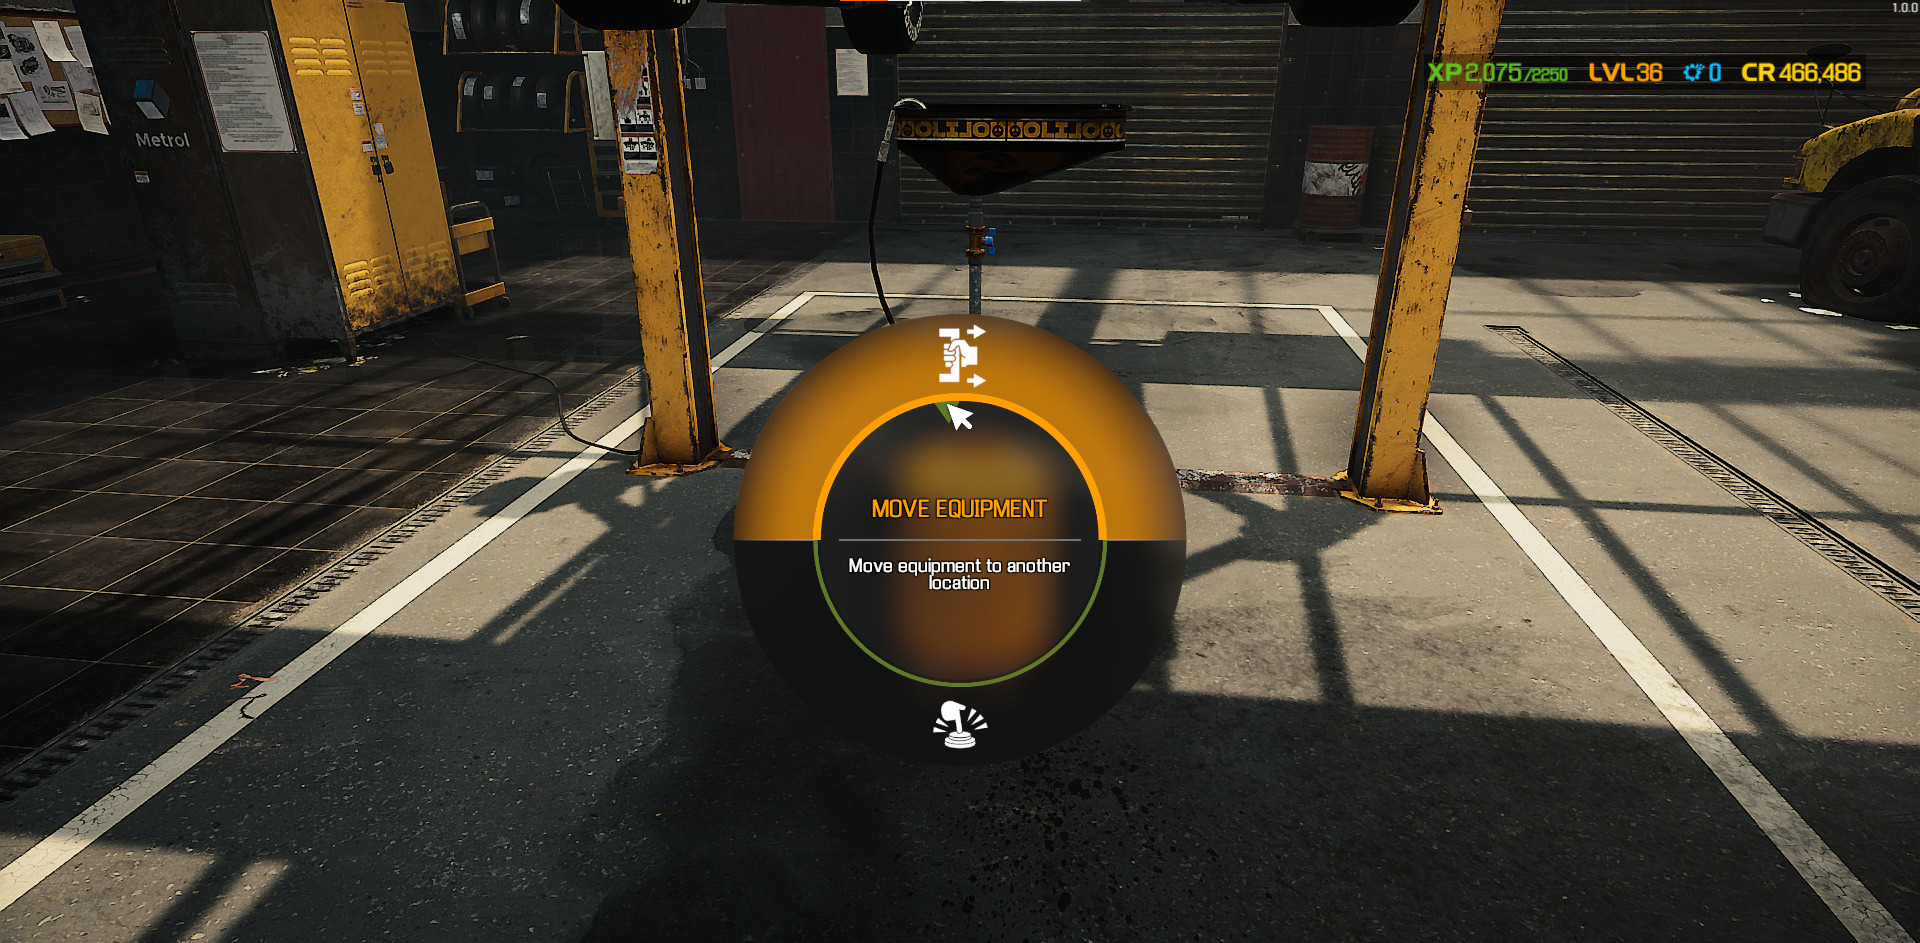 A screenshot showing the Move Equipment command on the Pie Wheel in Car Mechanic Simulator